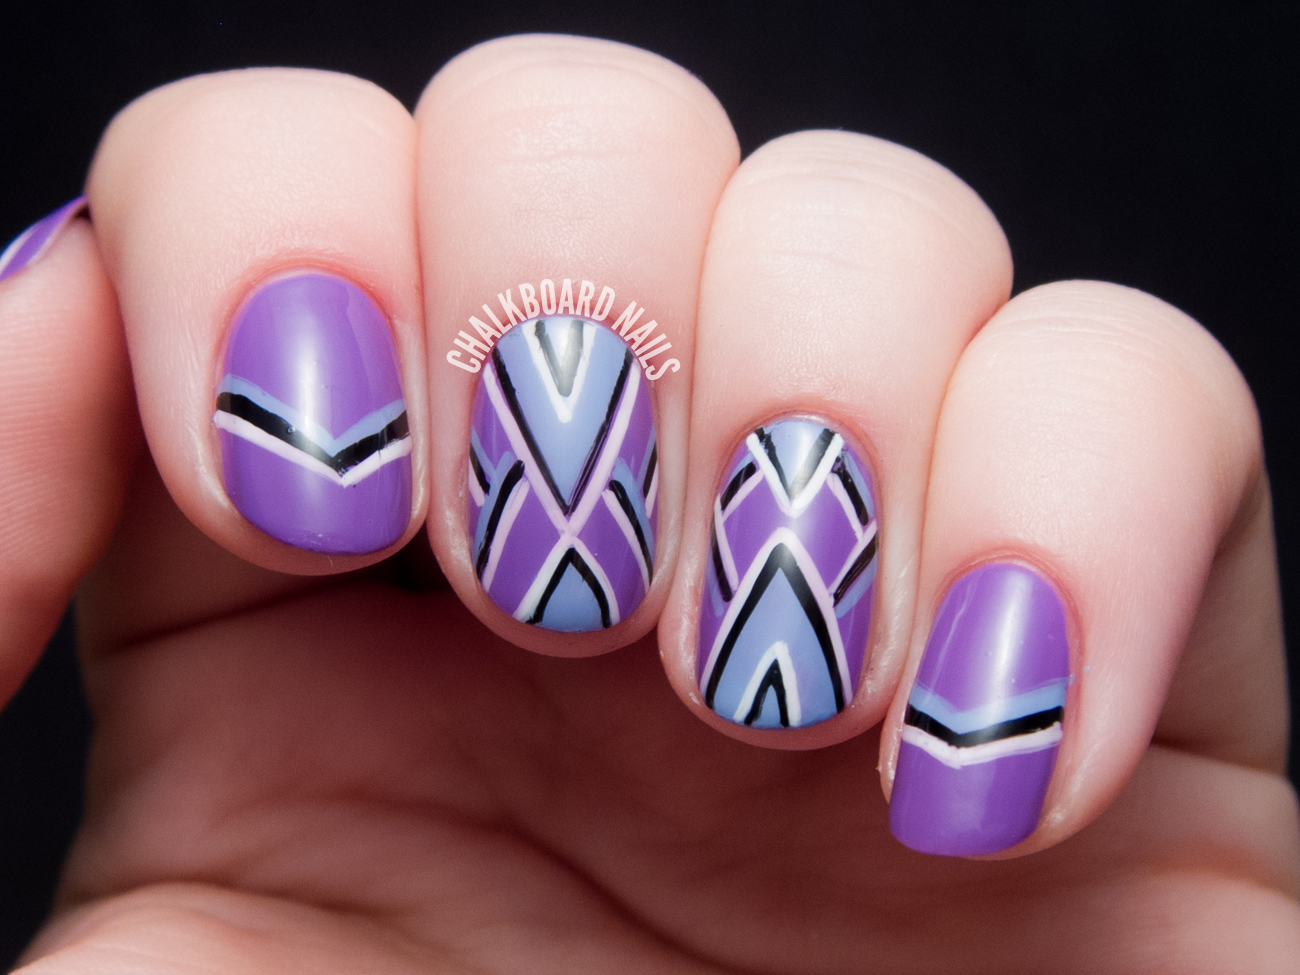 3. Easy Summer Chevron Nails - wide 7